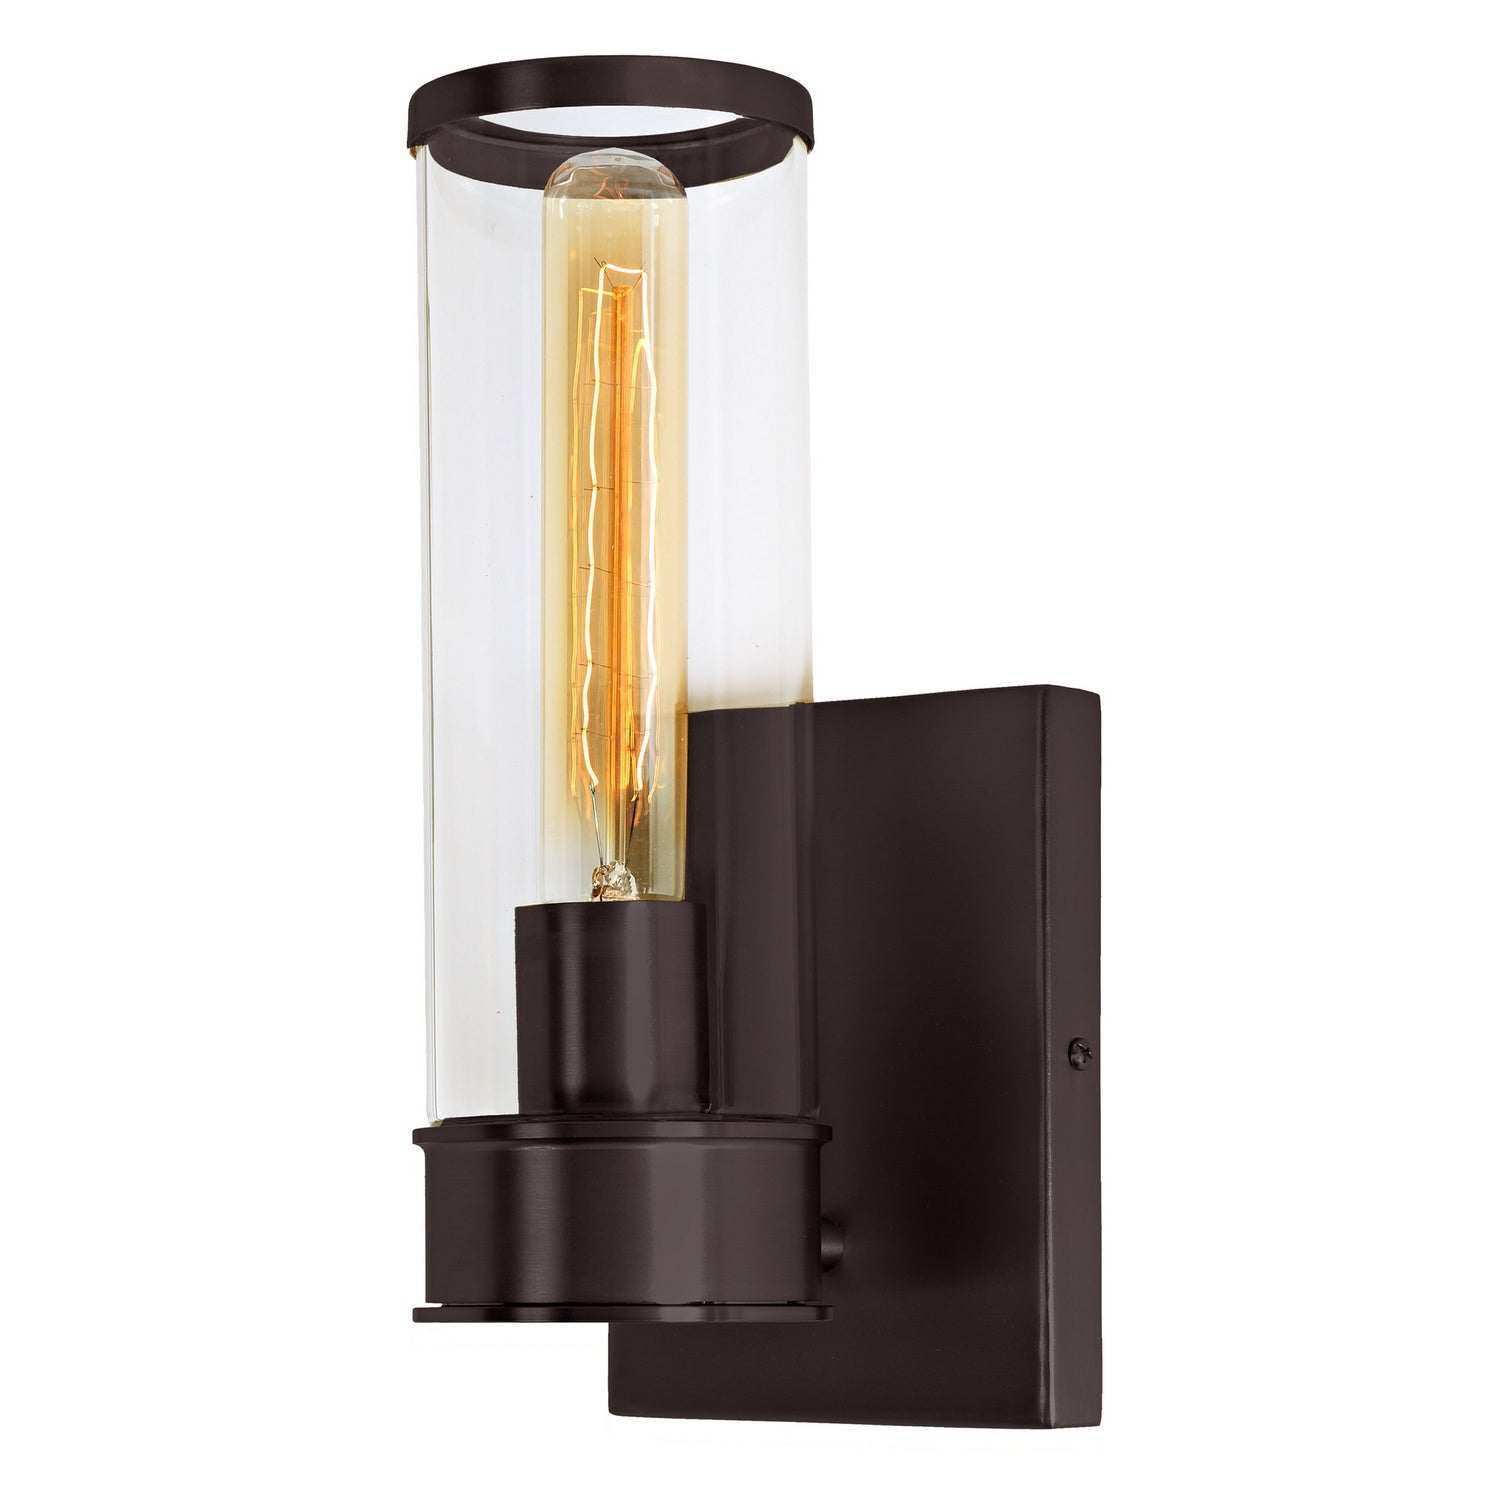 JVI Designs - 1231-08 - One Light Wall Sconce - Gramercy - Oil Rubbed Bronze